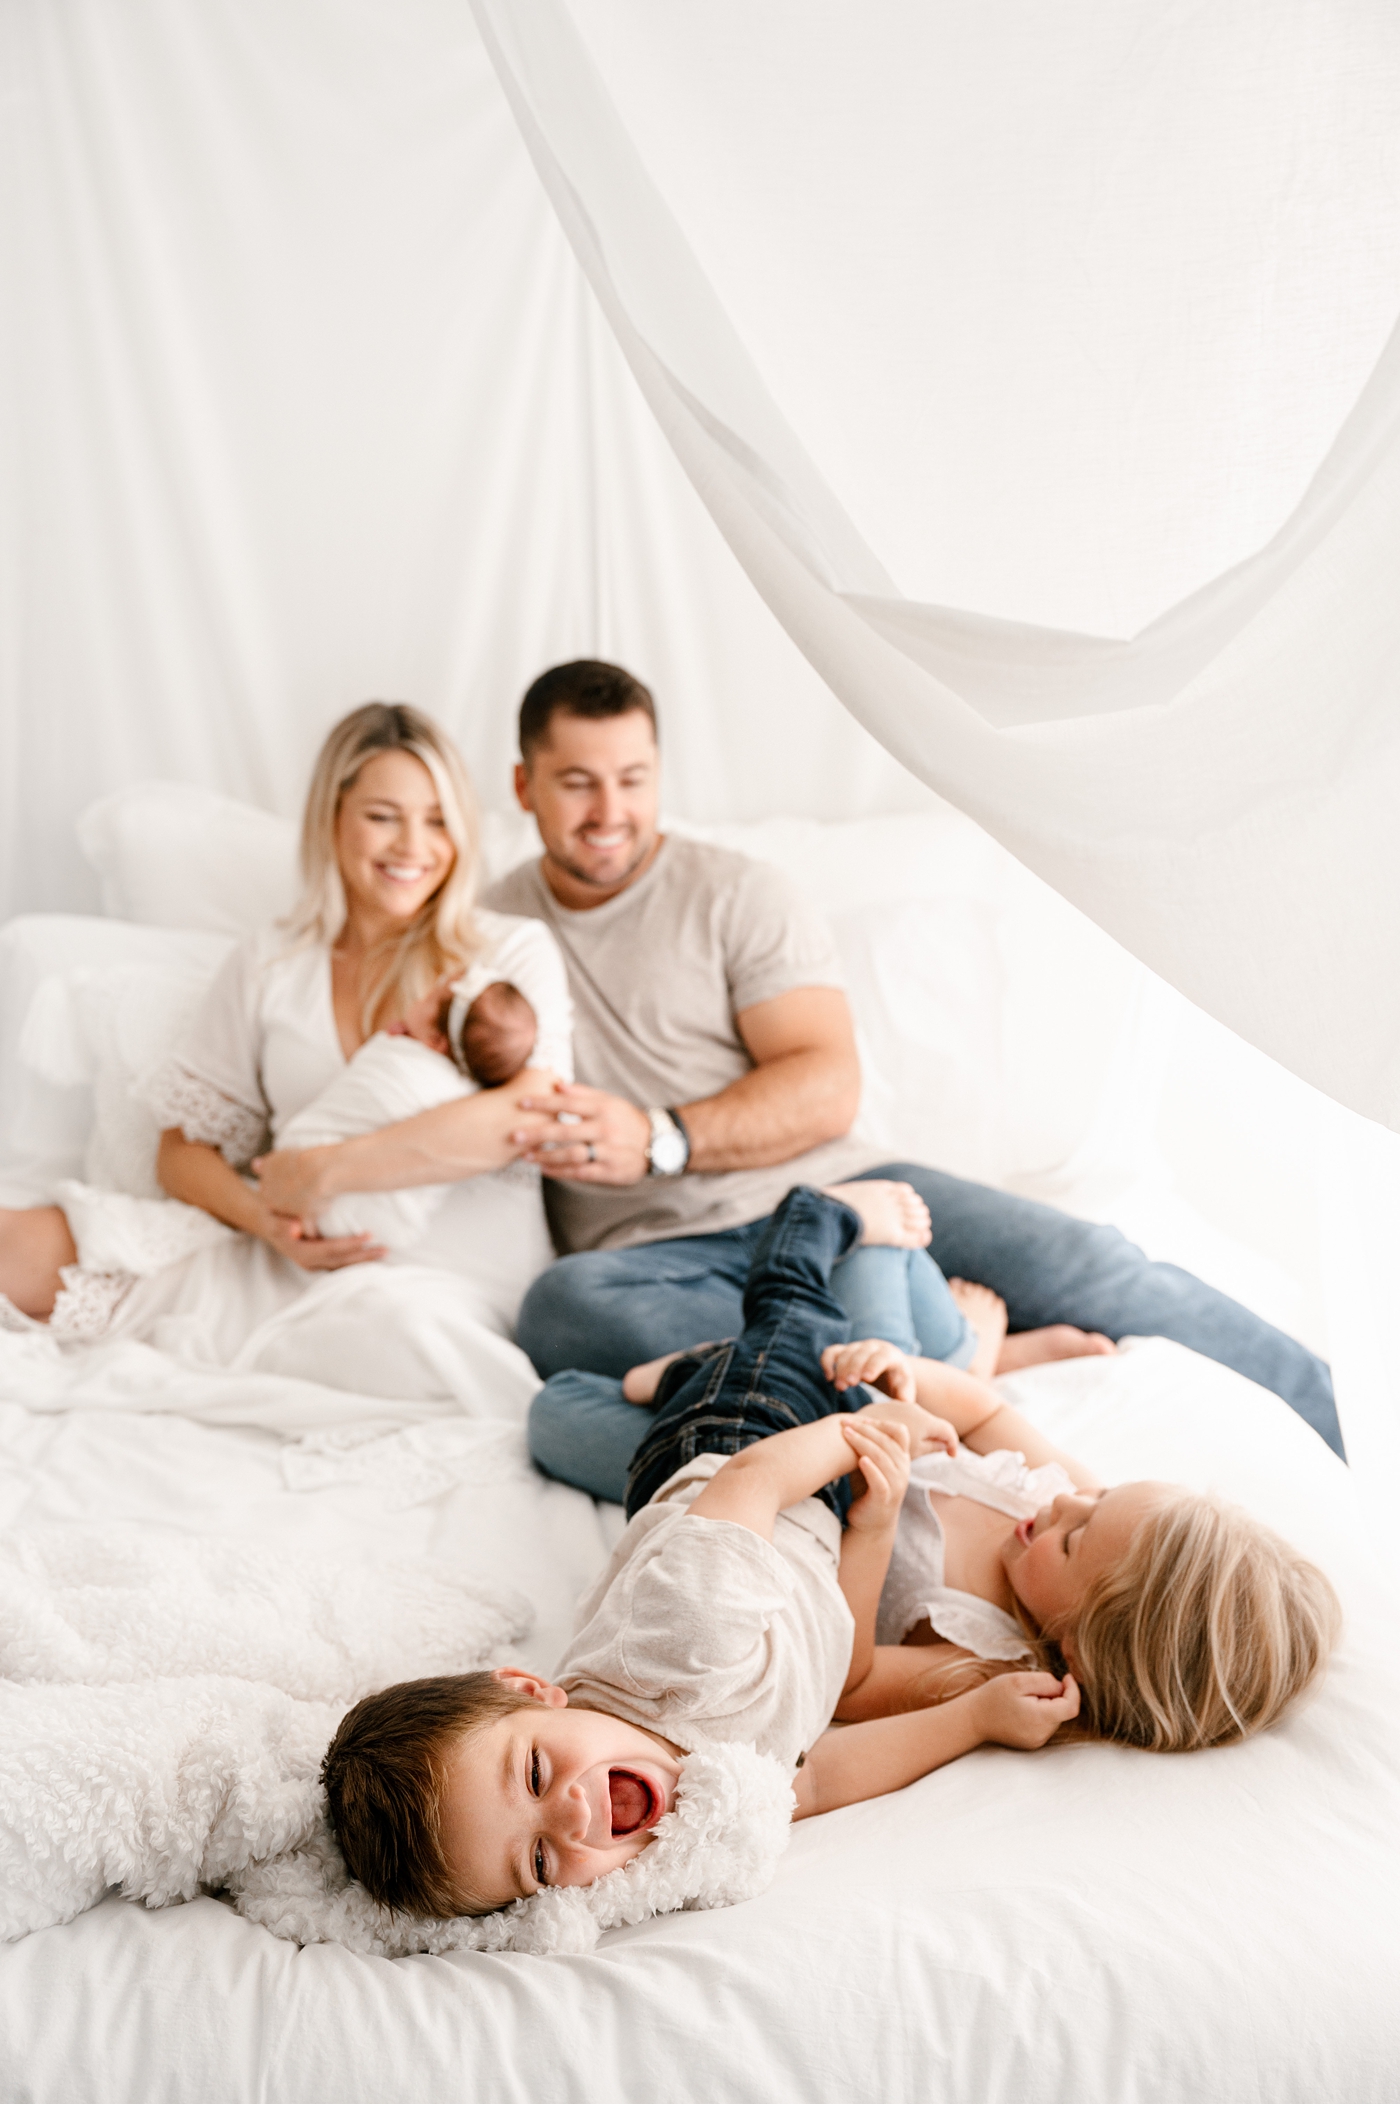 Children wrestle on the end of bed during lifestyle studio newborn session. Image by Meg Newton Photography.